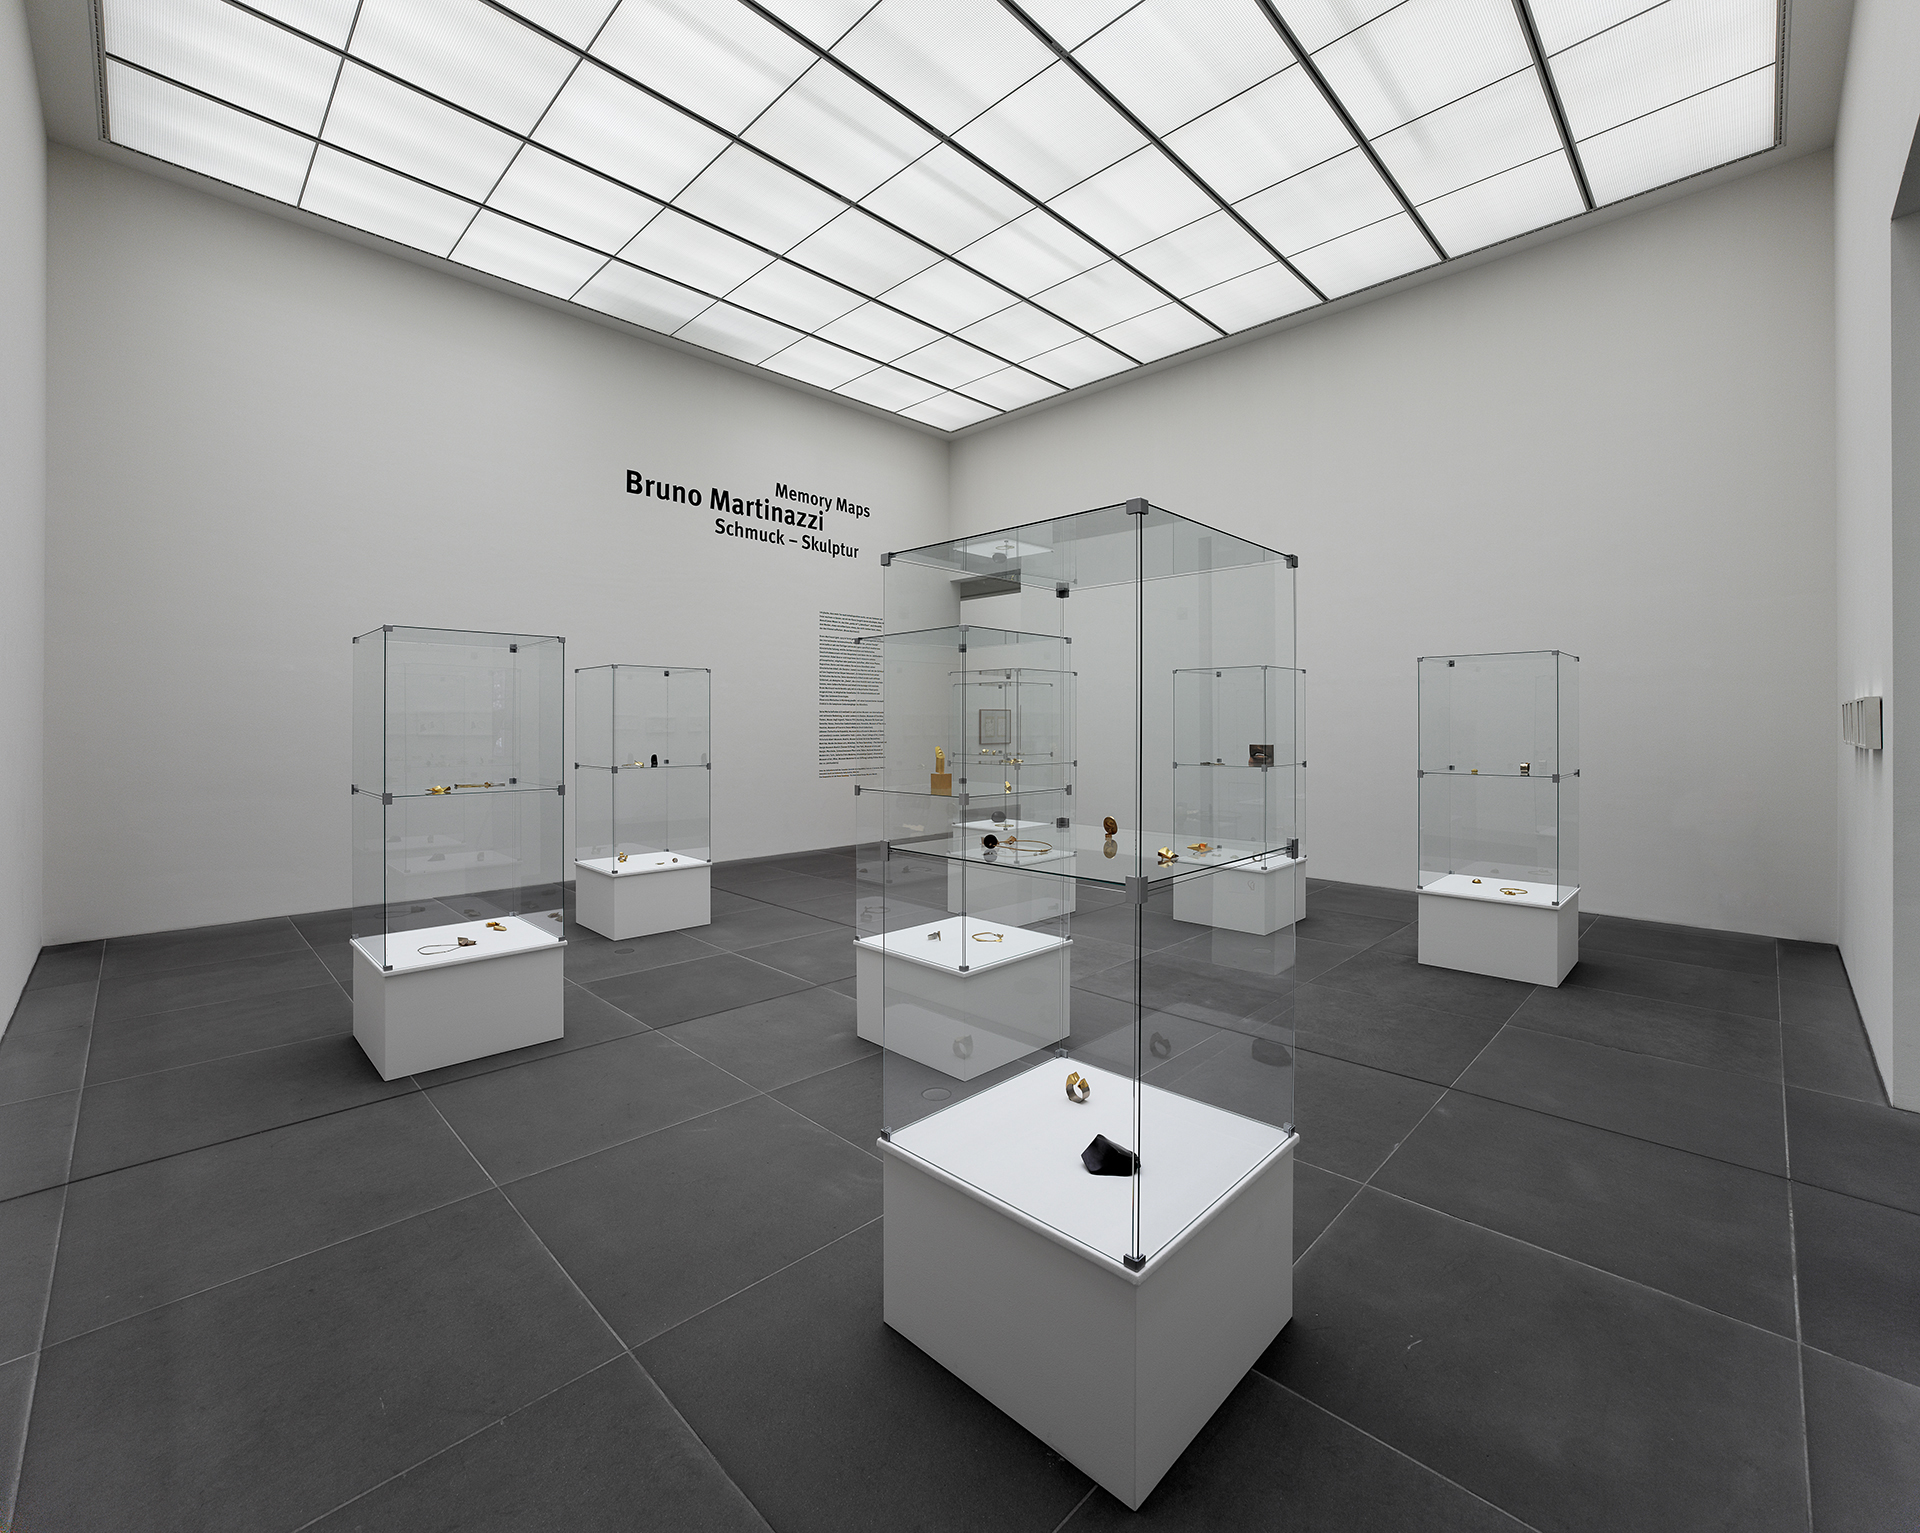 View of the exhibition. You can see a light-flooded exhibition room with a large ceiling window. Spread around the room are eight tall glass display cases with white plinths. Individual pieces of jewelry can be seen in them.